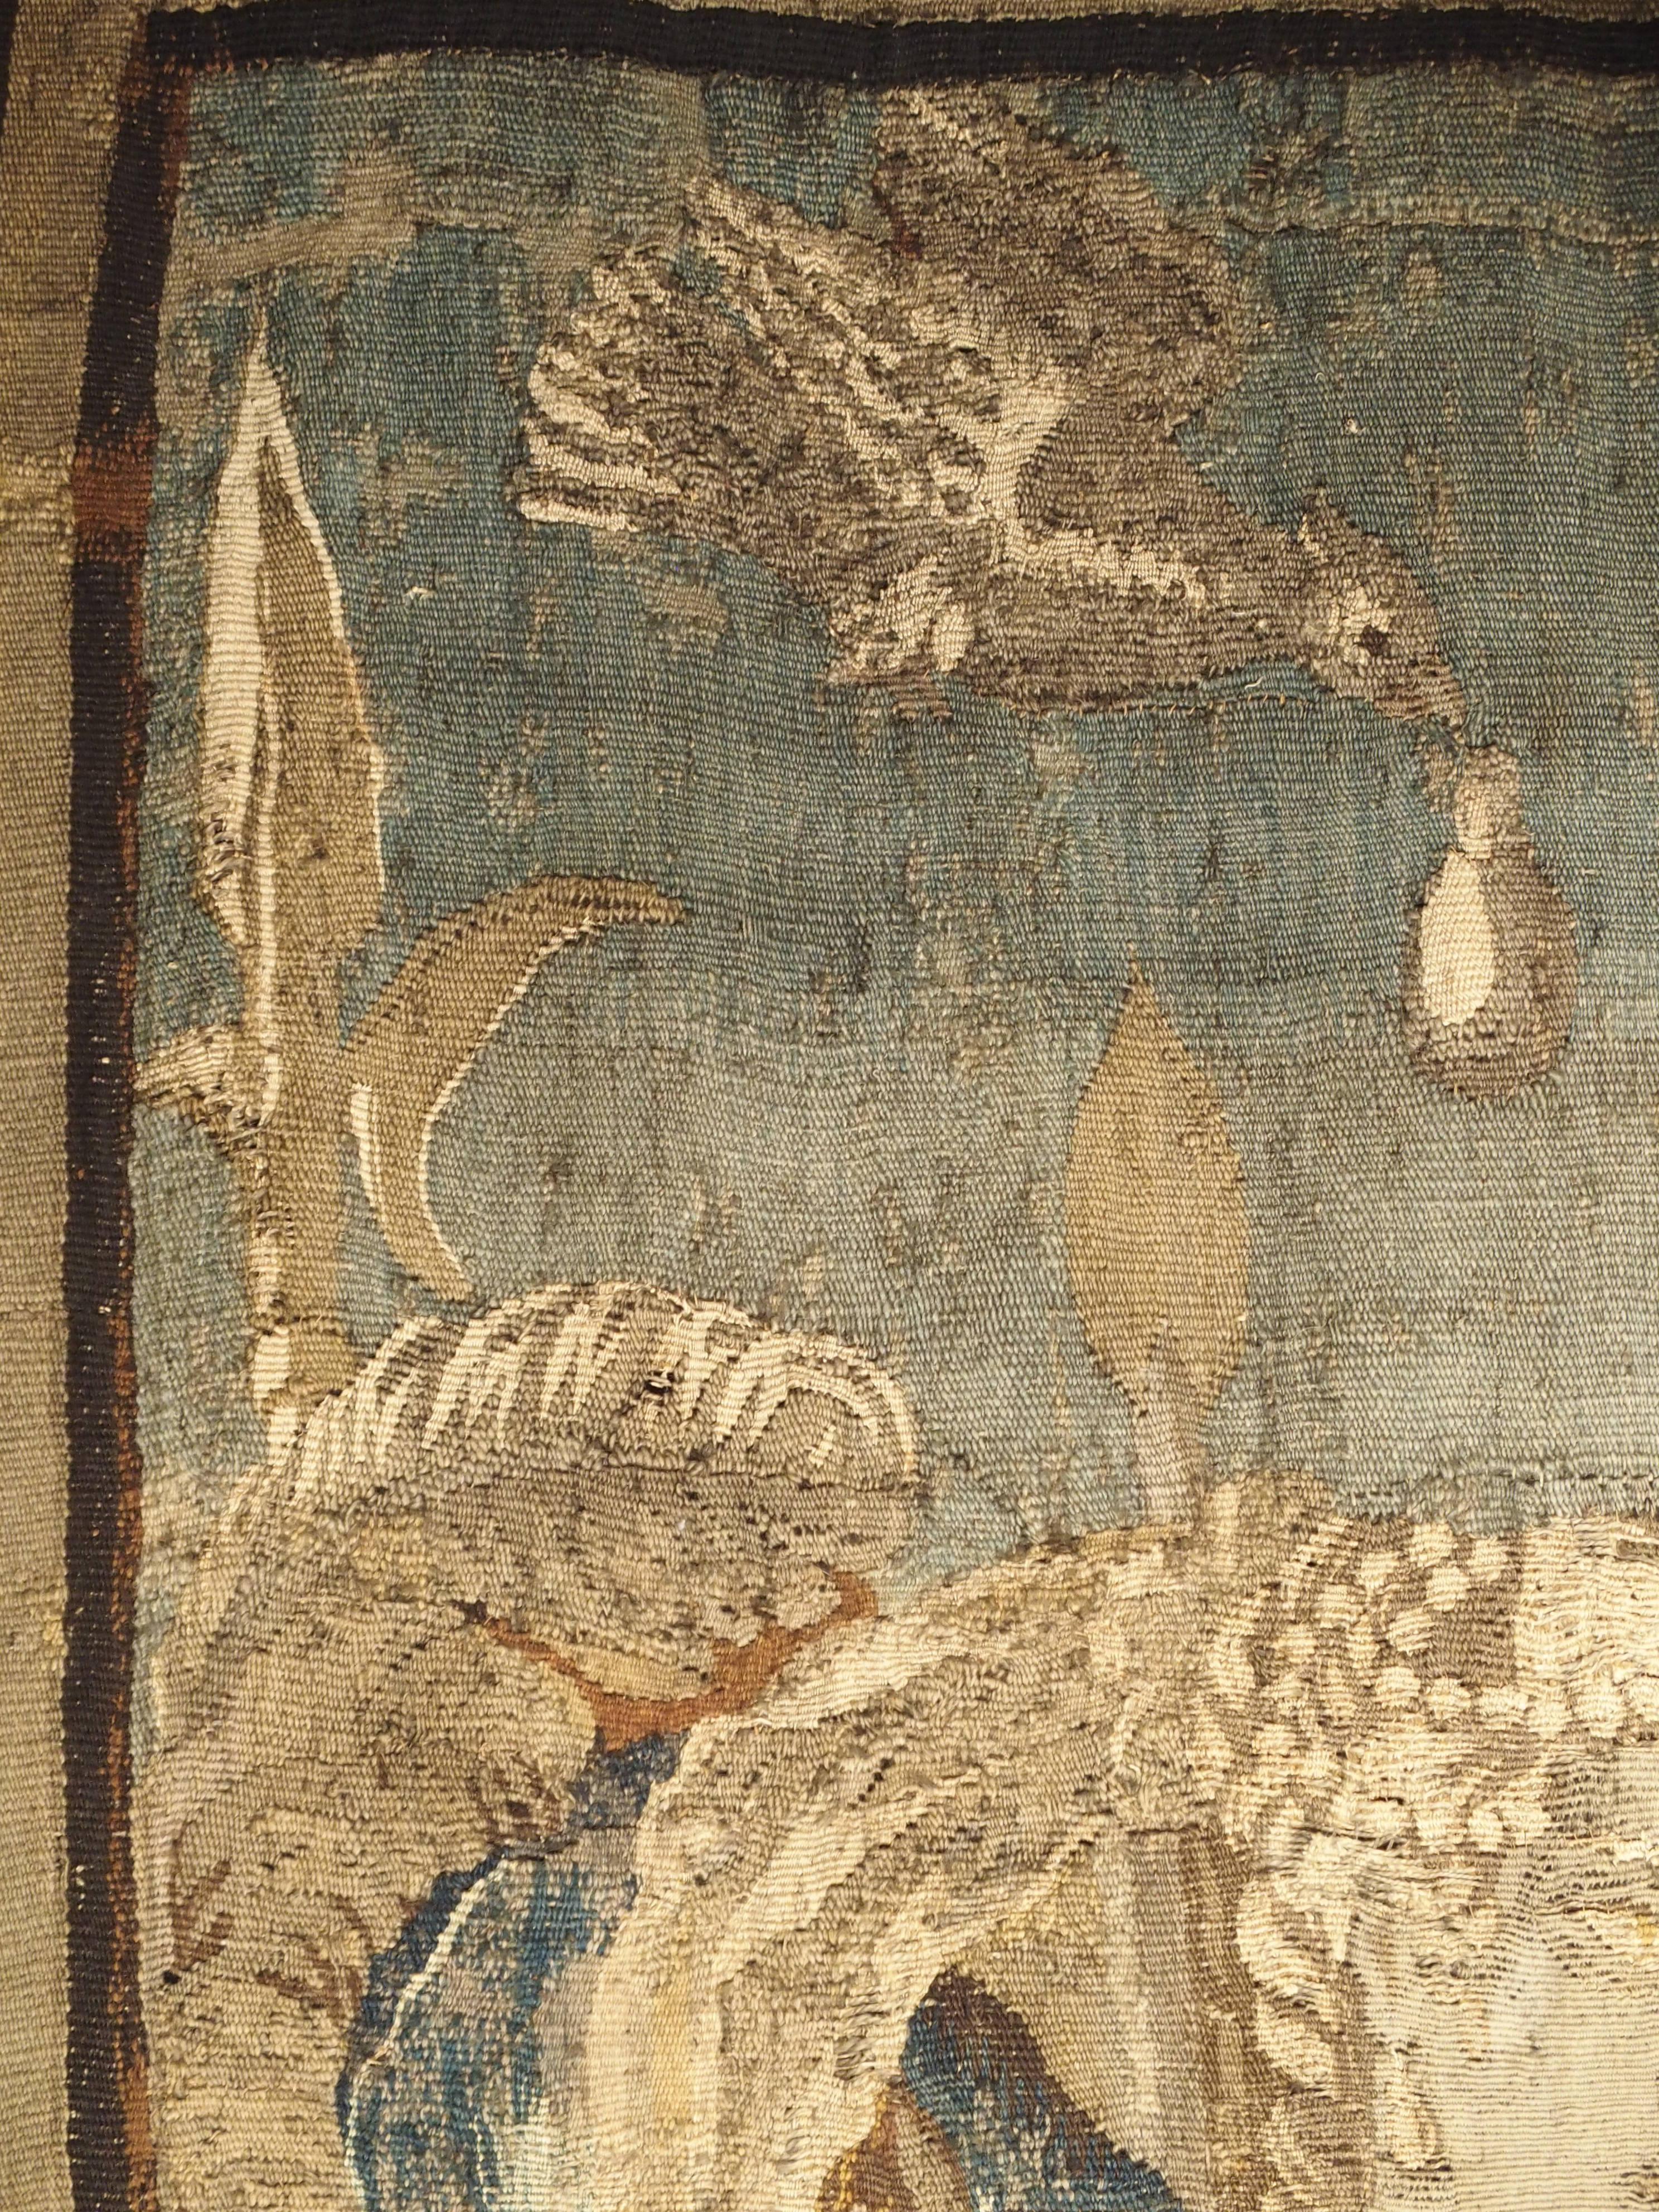 17th Century Tapestry Fragment with Ornate Border 3